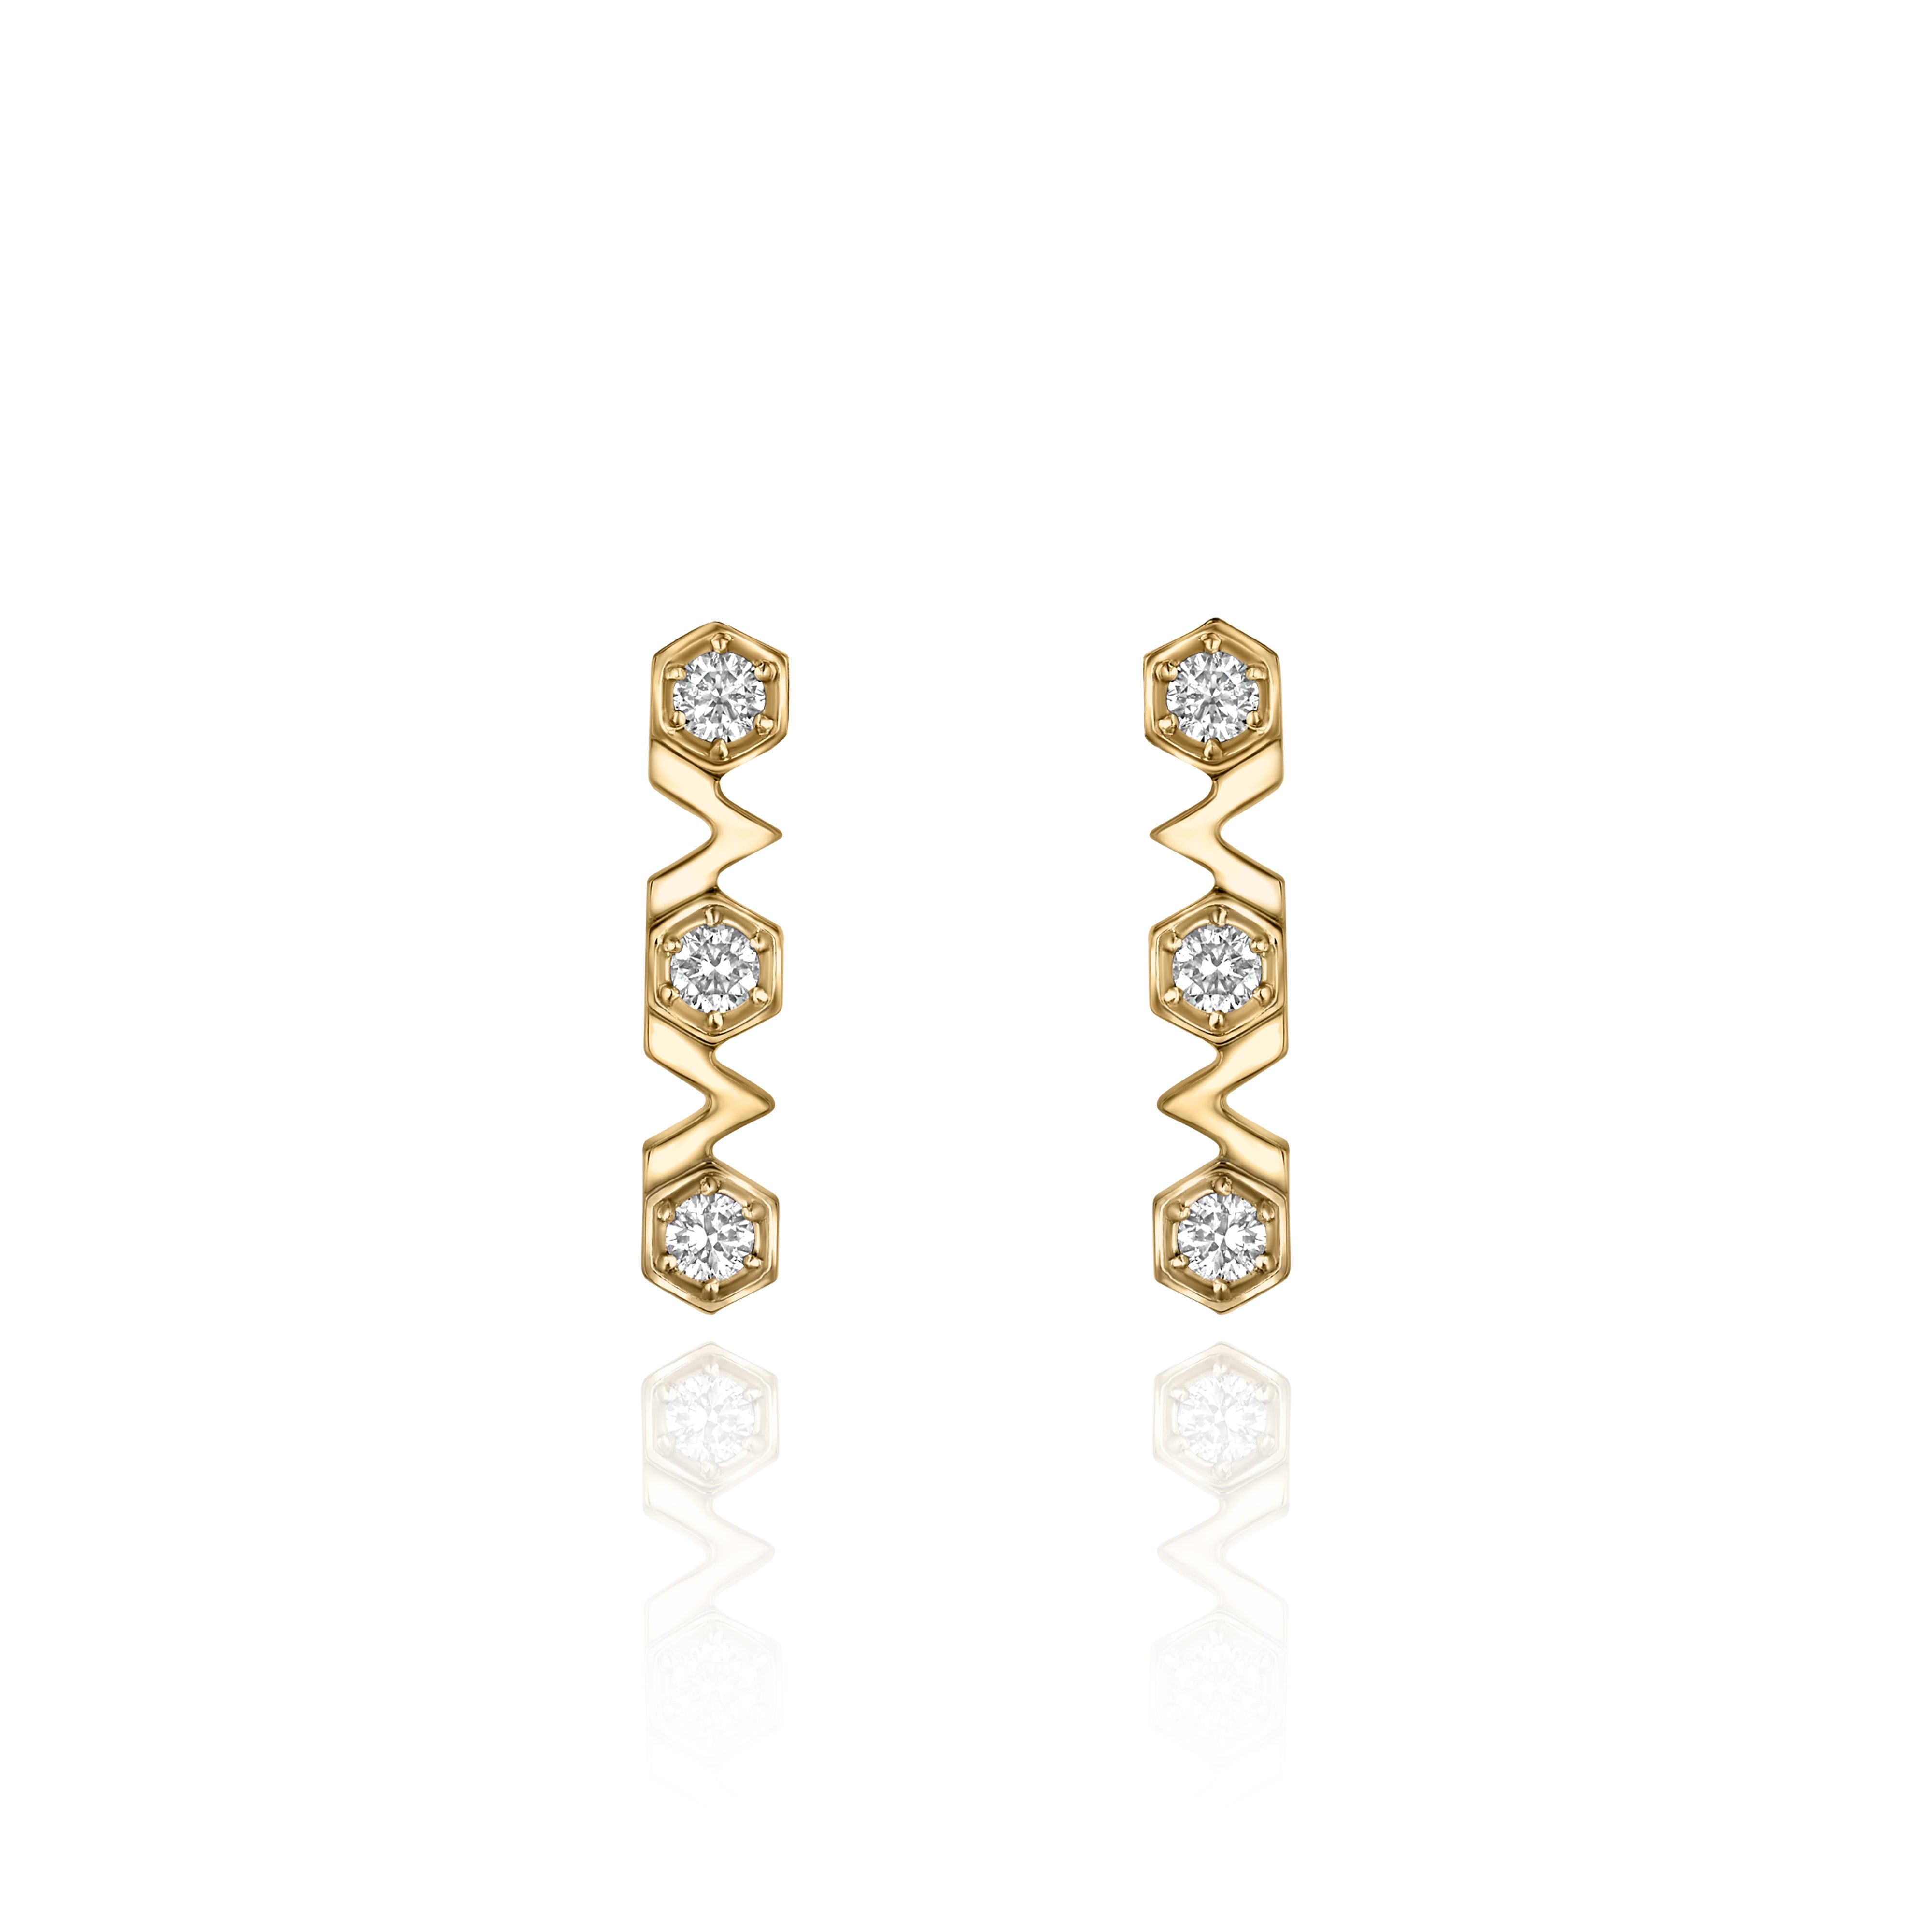 Yellow Gold Earrings with octagons and V shapes, and Diamonds, Small